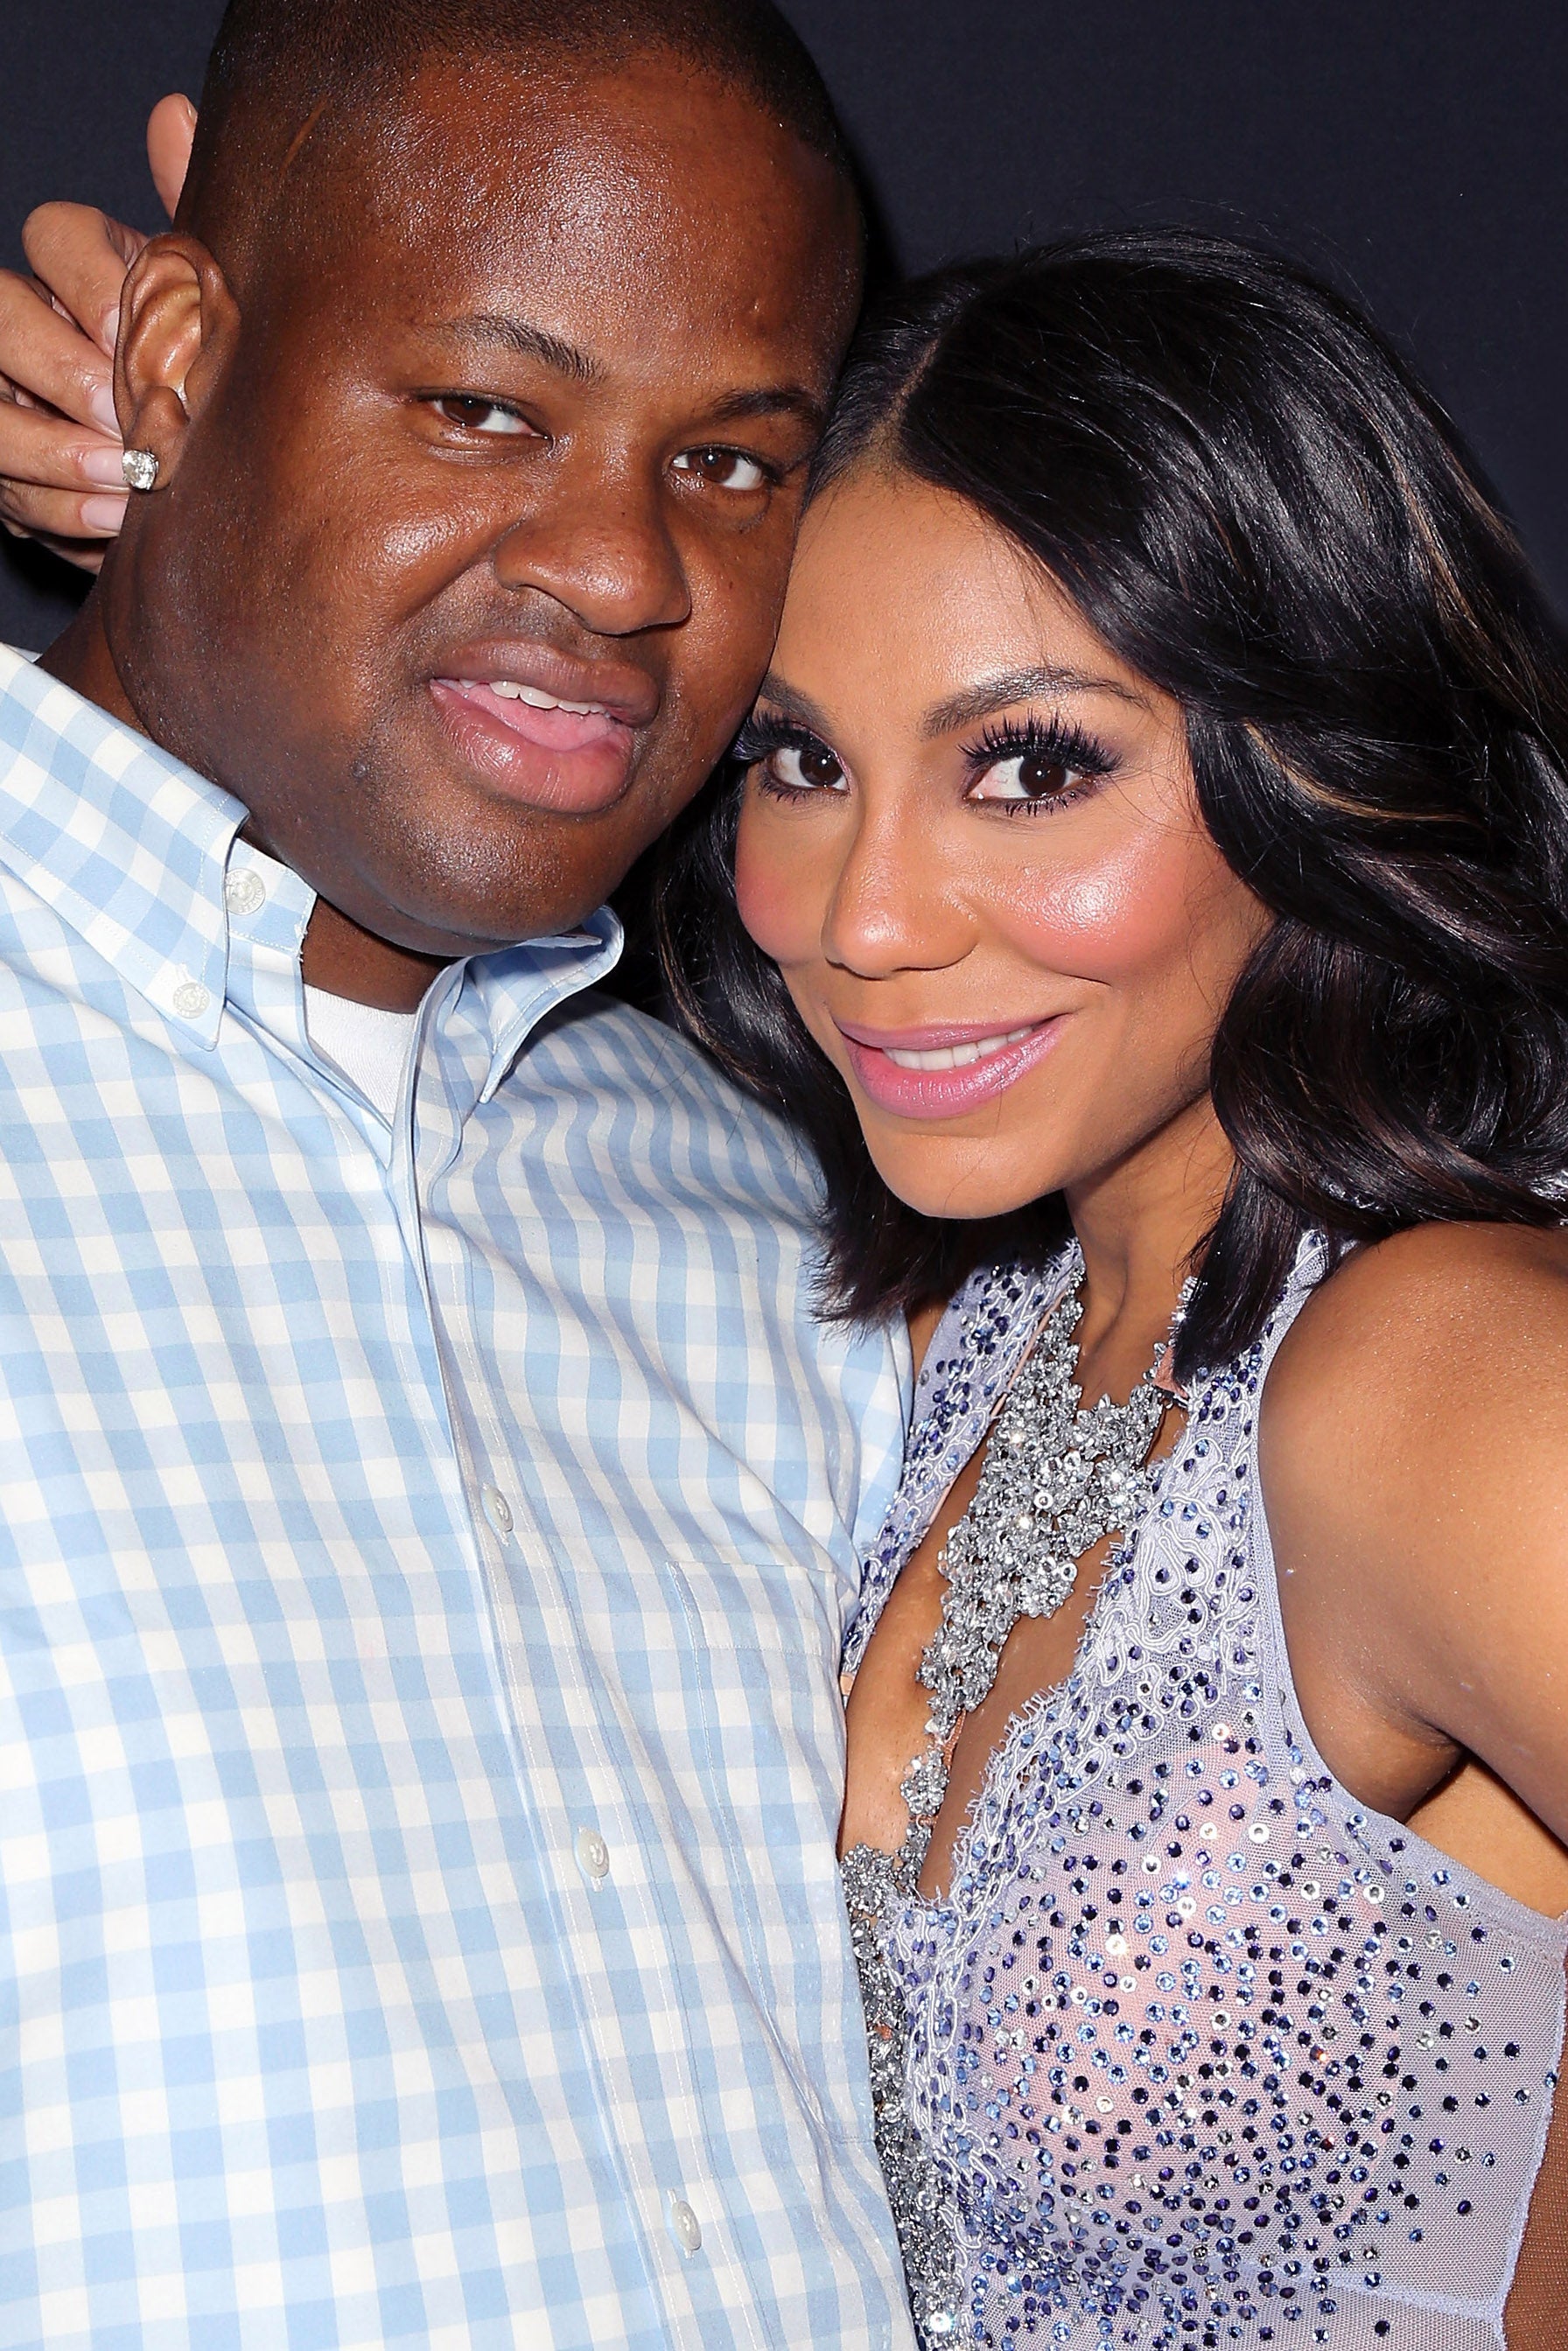 Tamar Braxton and Husband Vince Herbert Get Cozy At Bad Boy Reunion Tour, Put Breakup Rumors to Rest
